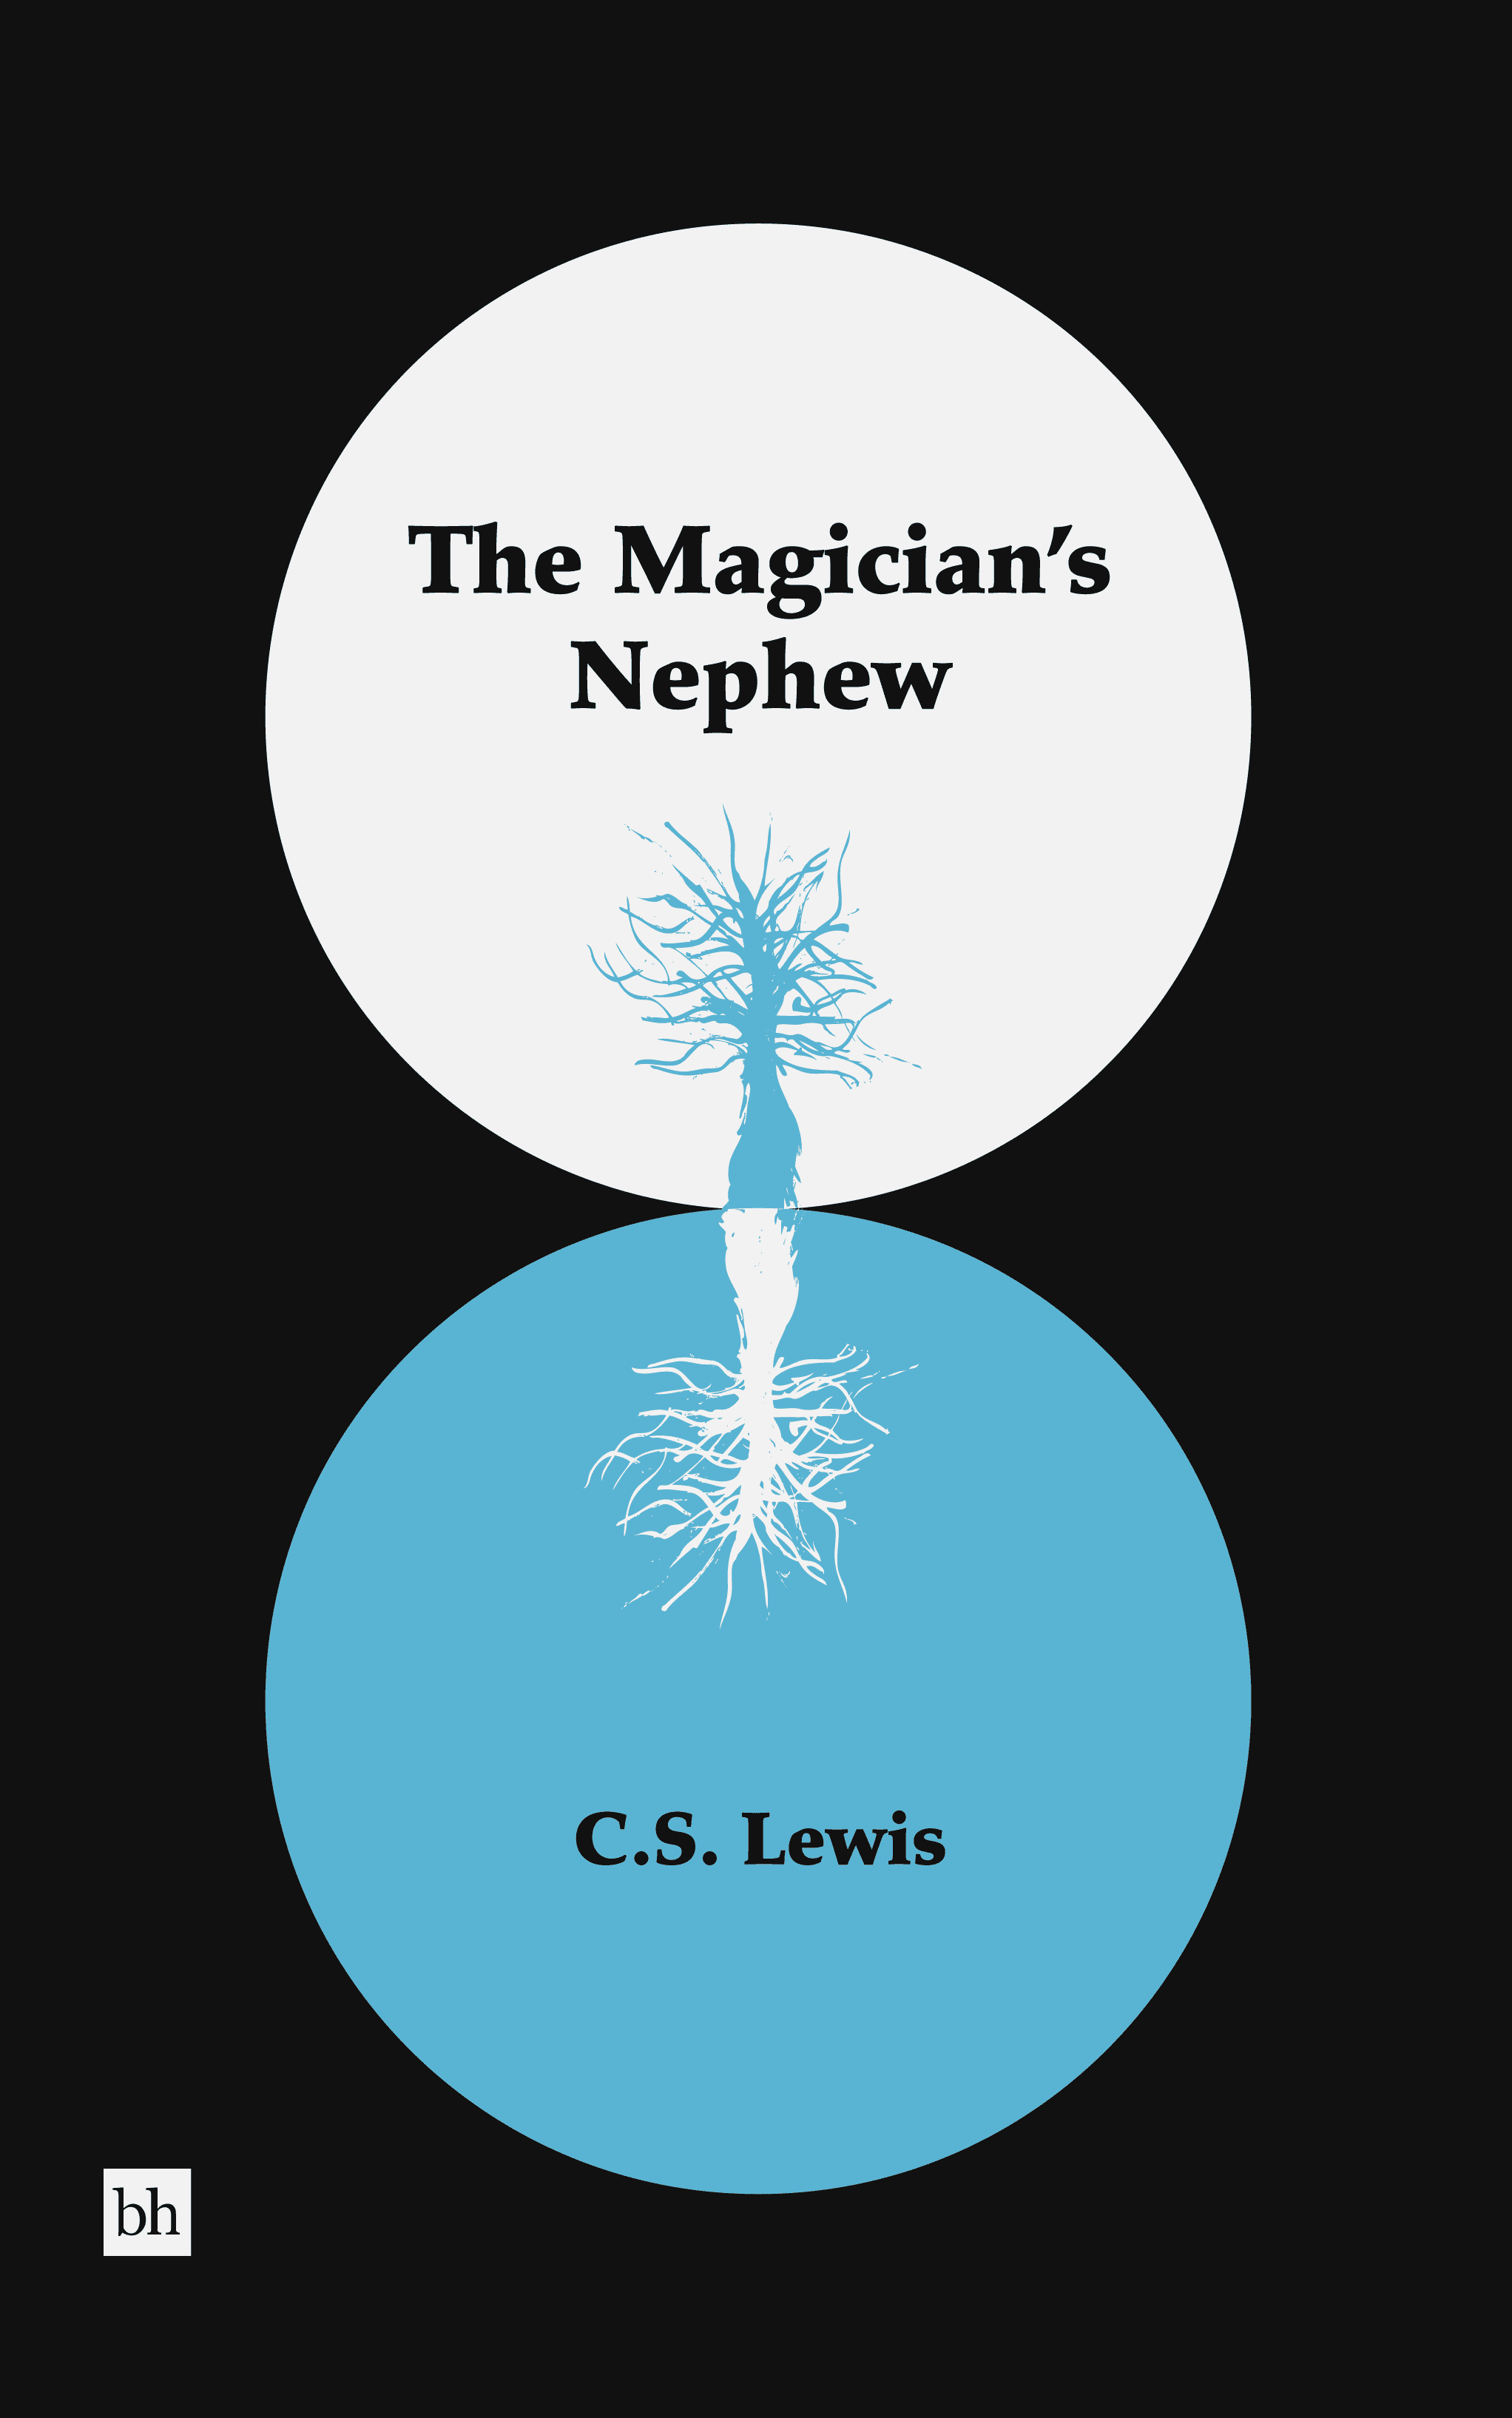 Book cover mock thumbnail for The Magician's Nephew